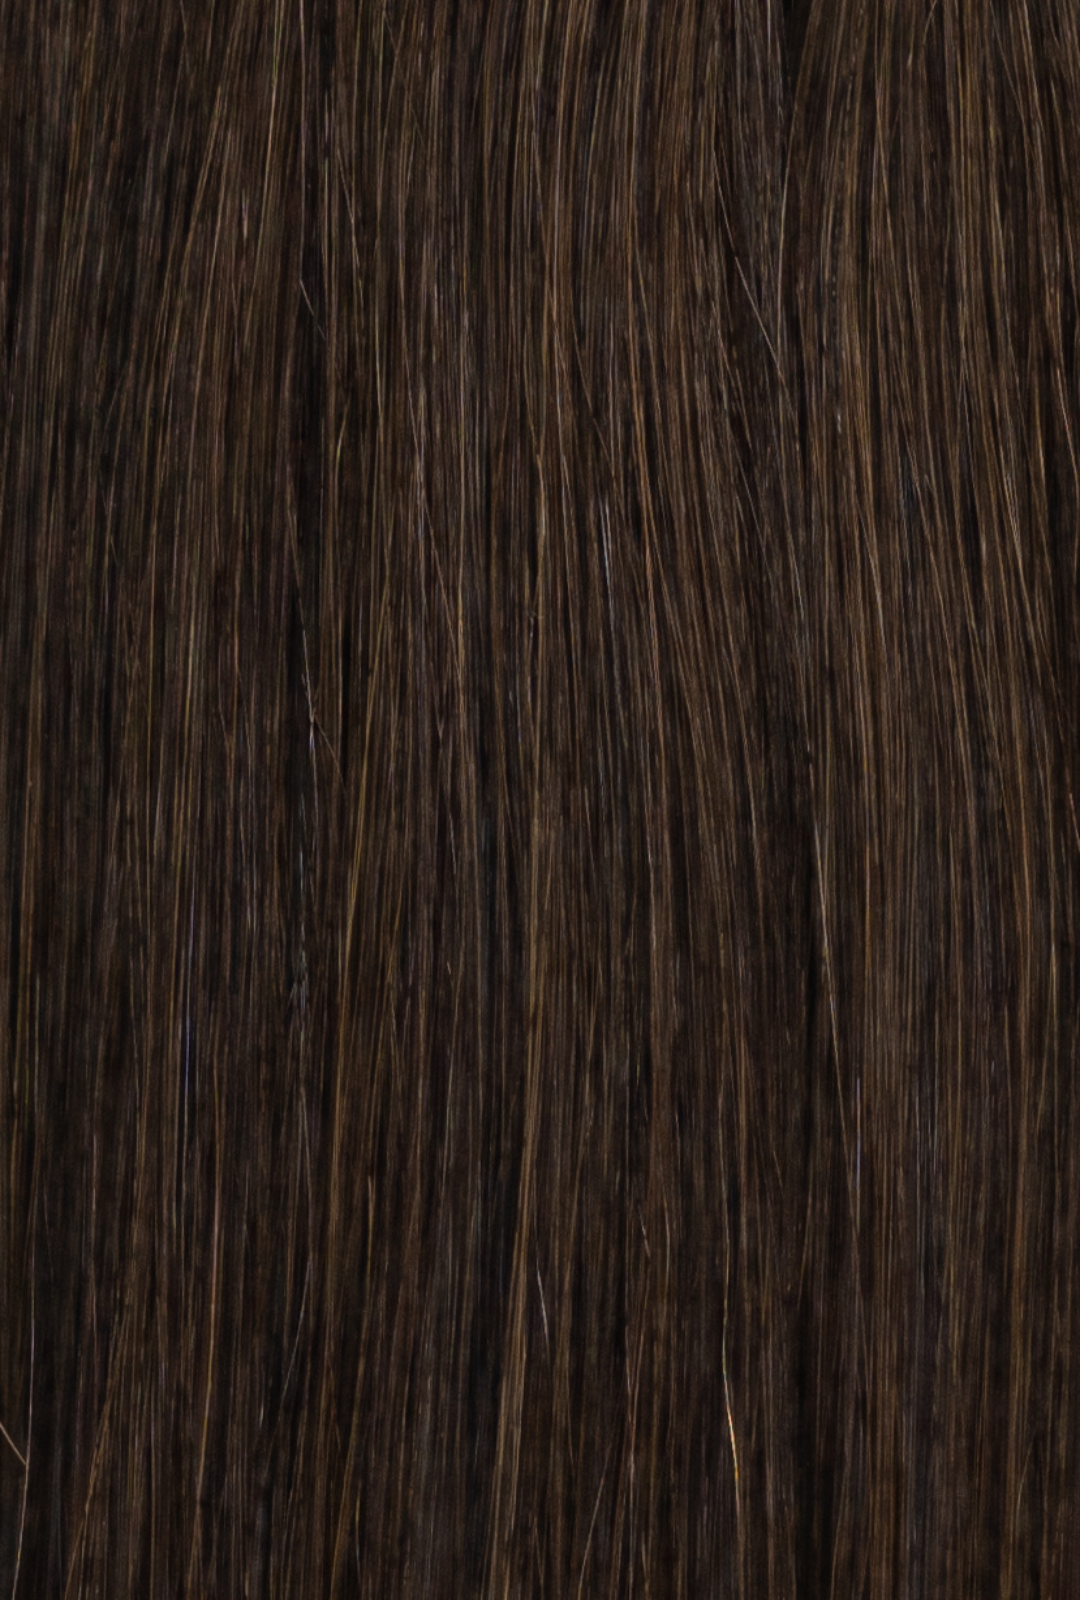 Laced Hair Hand Tied Weft Extensions #2 (Chocolate)